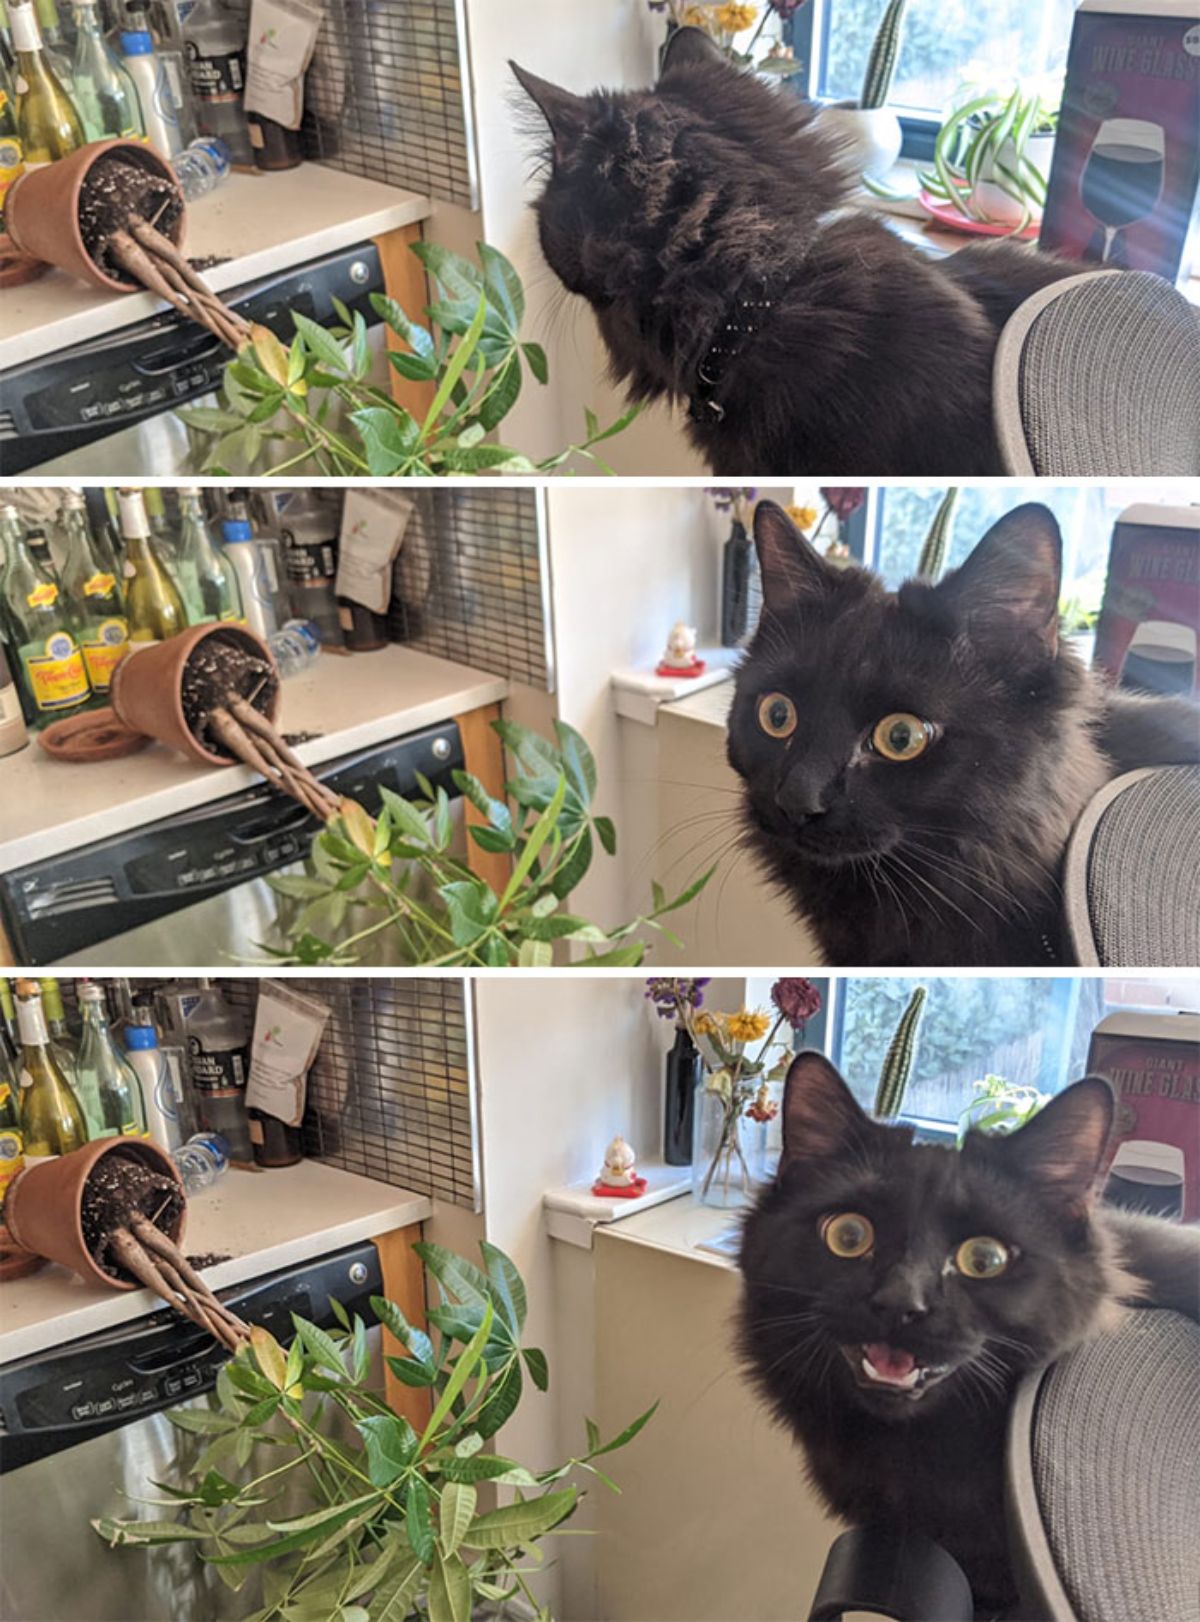 3 photos of a tipped over plant on a table and a black cat looking at the plant and then the camera